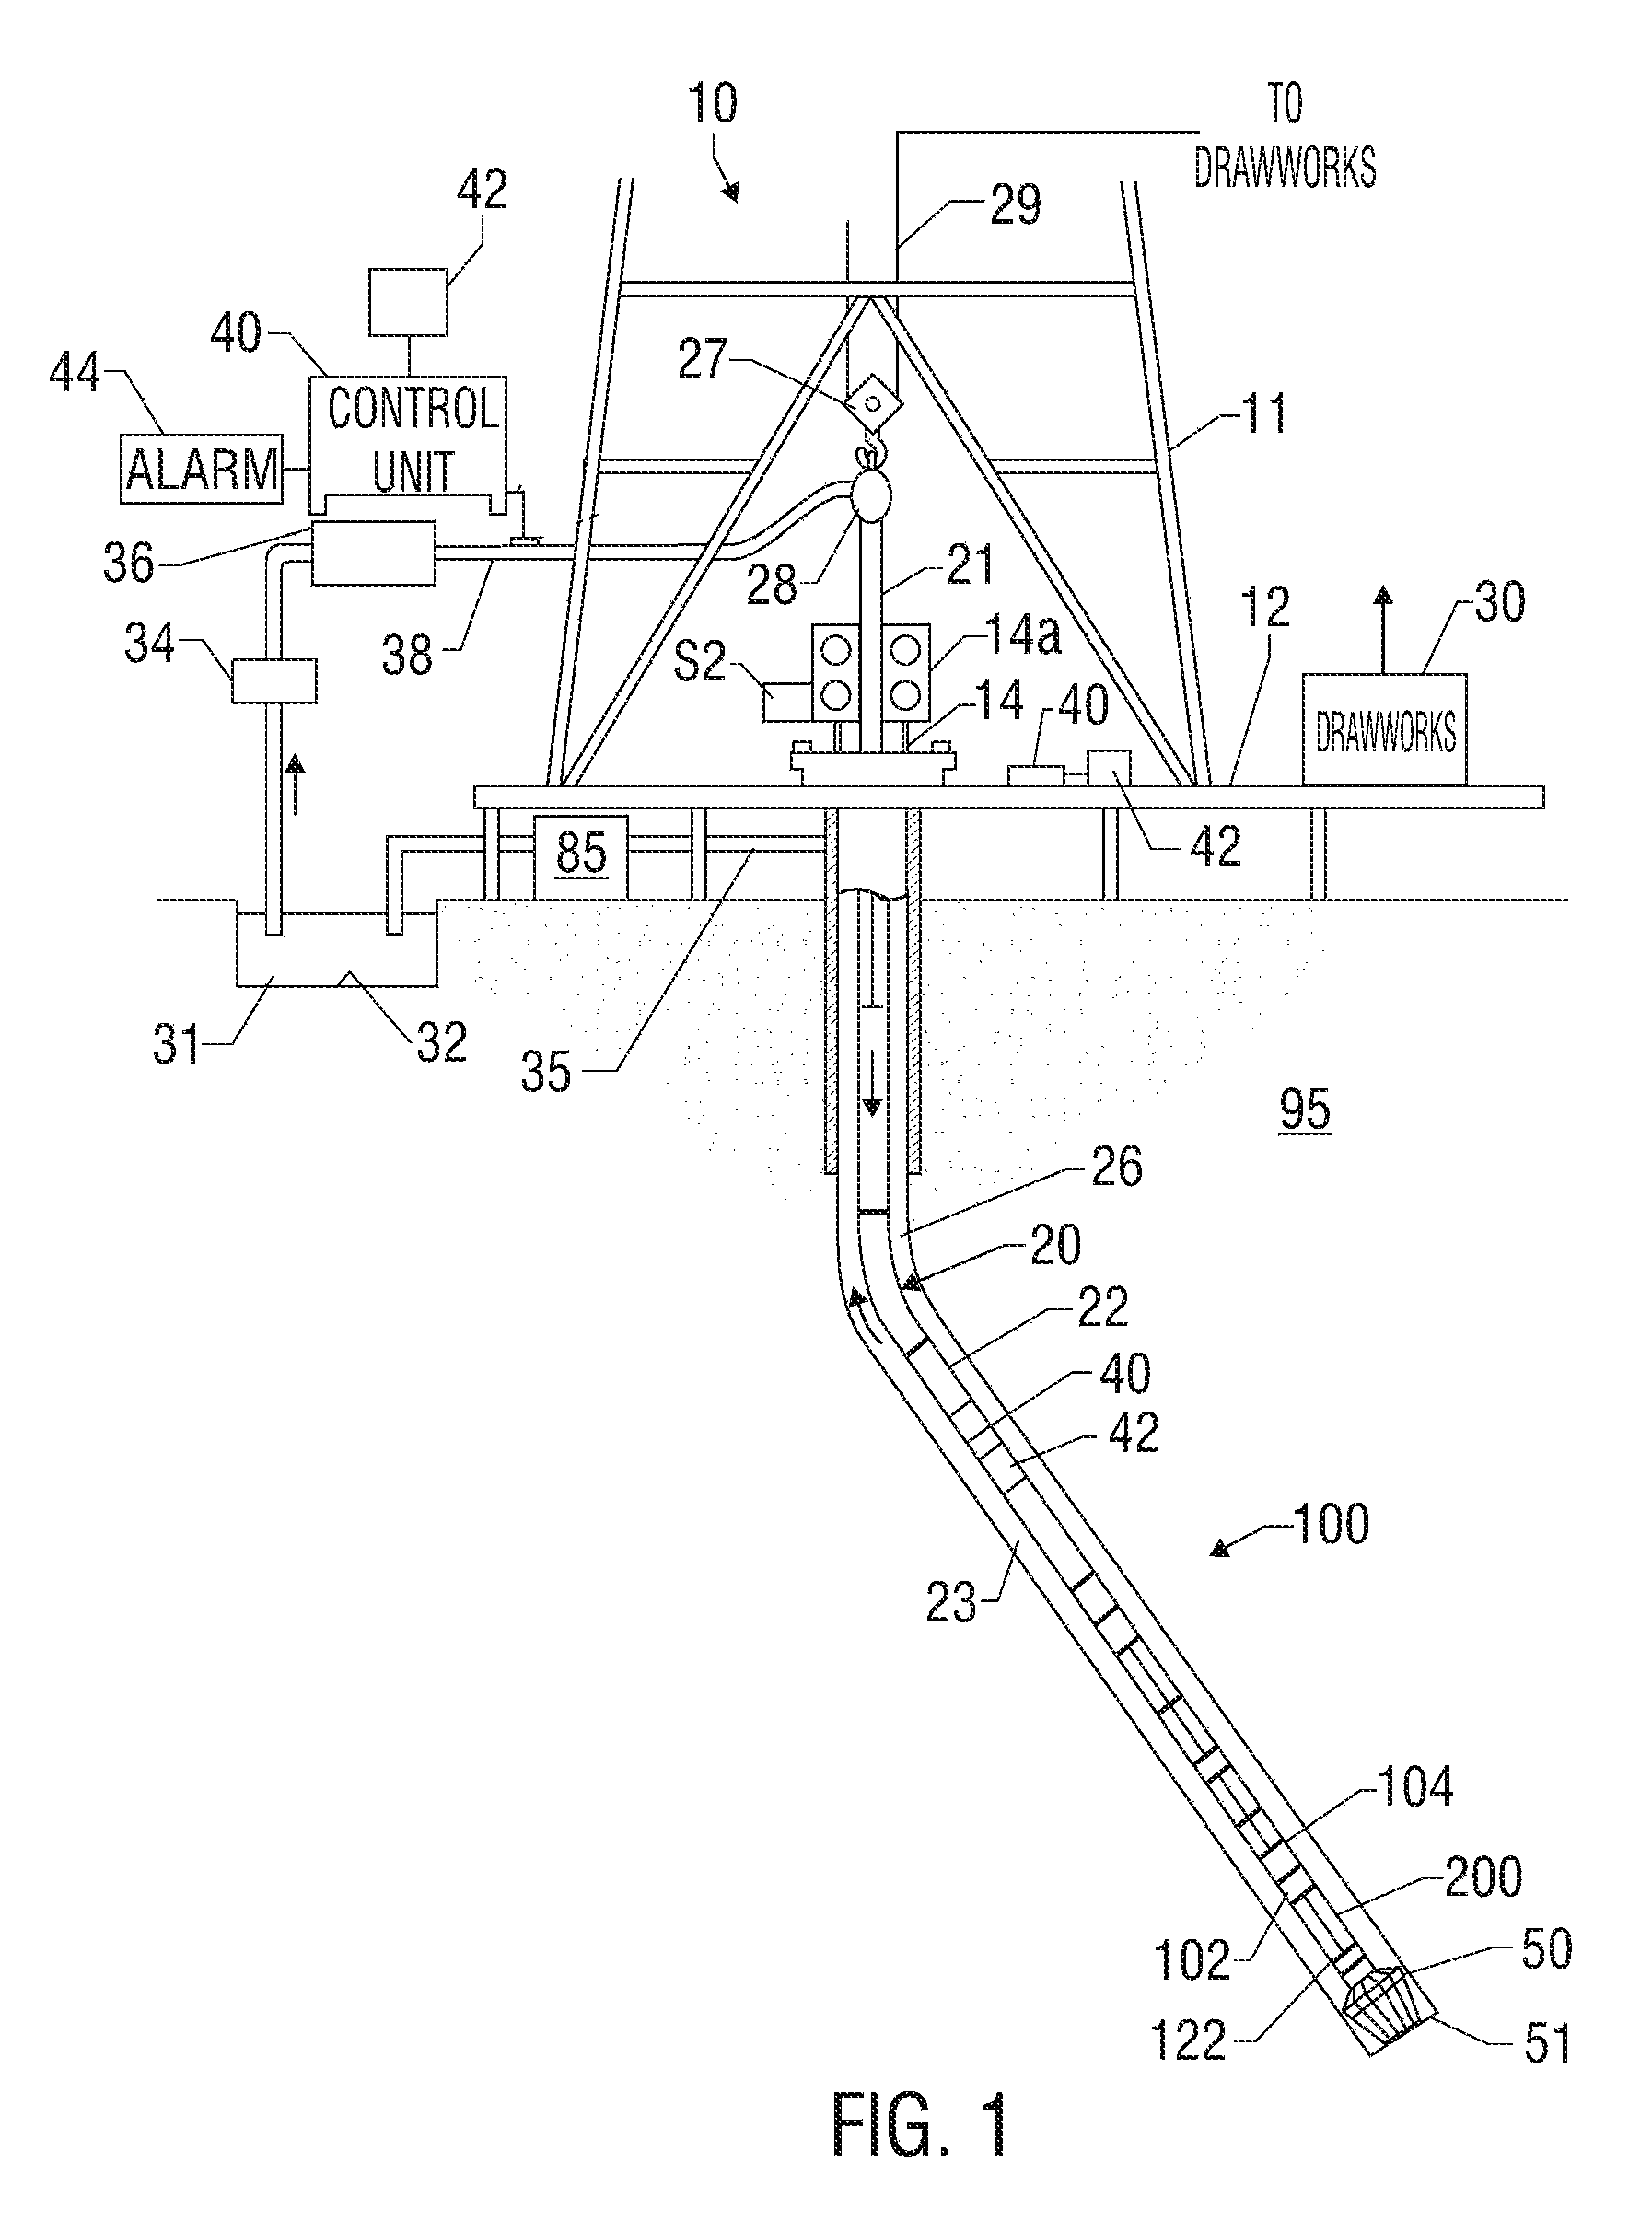 Closed loop drilling assembly with electronics outside a non-rotating sleeve